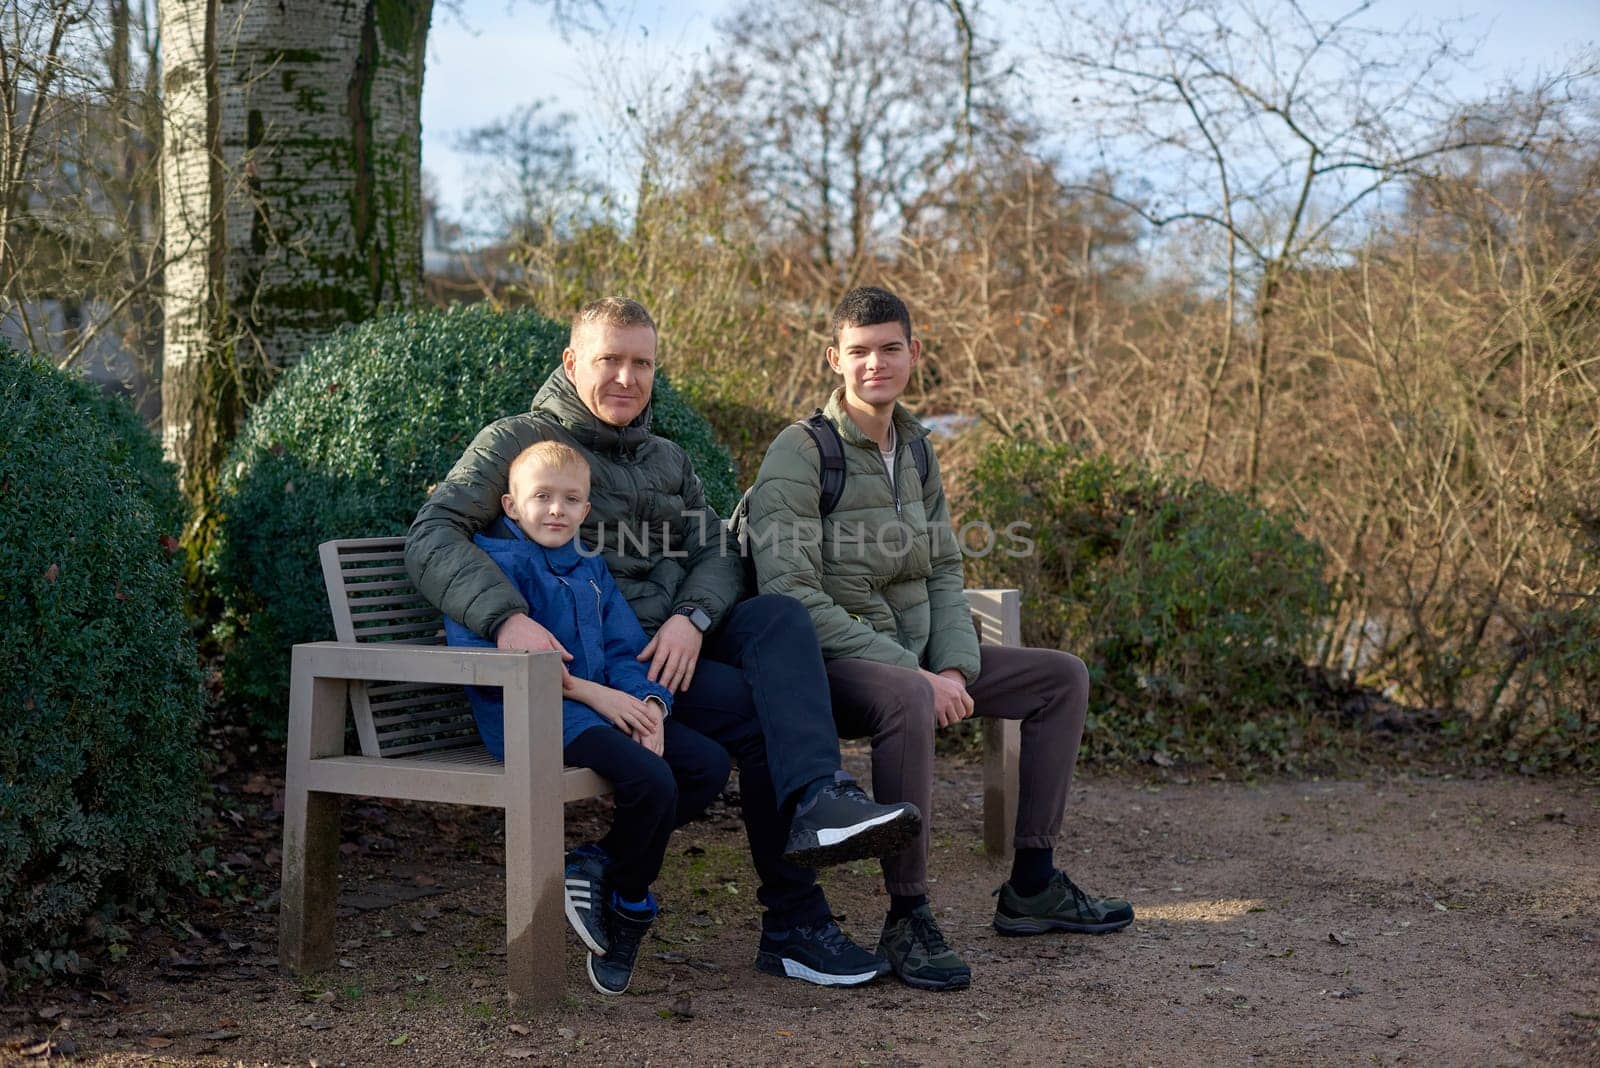 Dad with two sons sitting on a bench in autumn park. Experience the tranquility of familial bonds in the heart of autumn with this serene image. A father, 40 years old, and his two sons - a beautiful 8-year-old boy and a 17-year-old young man, seated in the park. The autumnal ambiance adds warmth to this captivating moment of family togetherness.